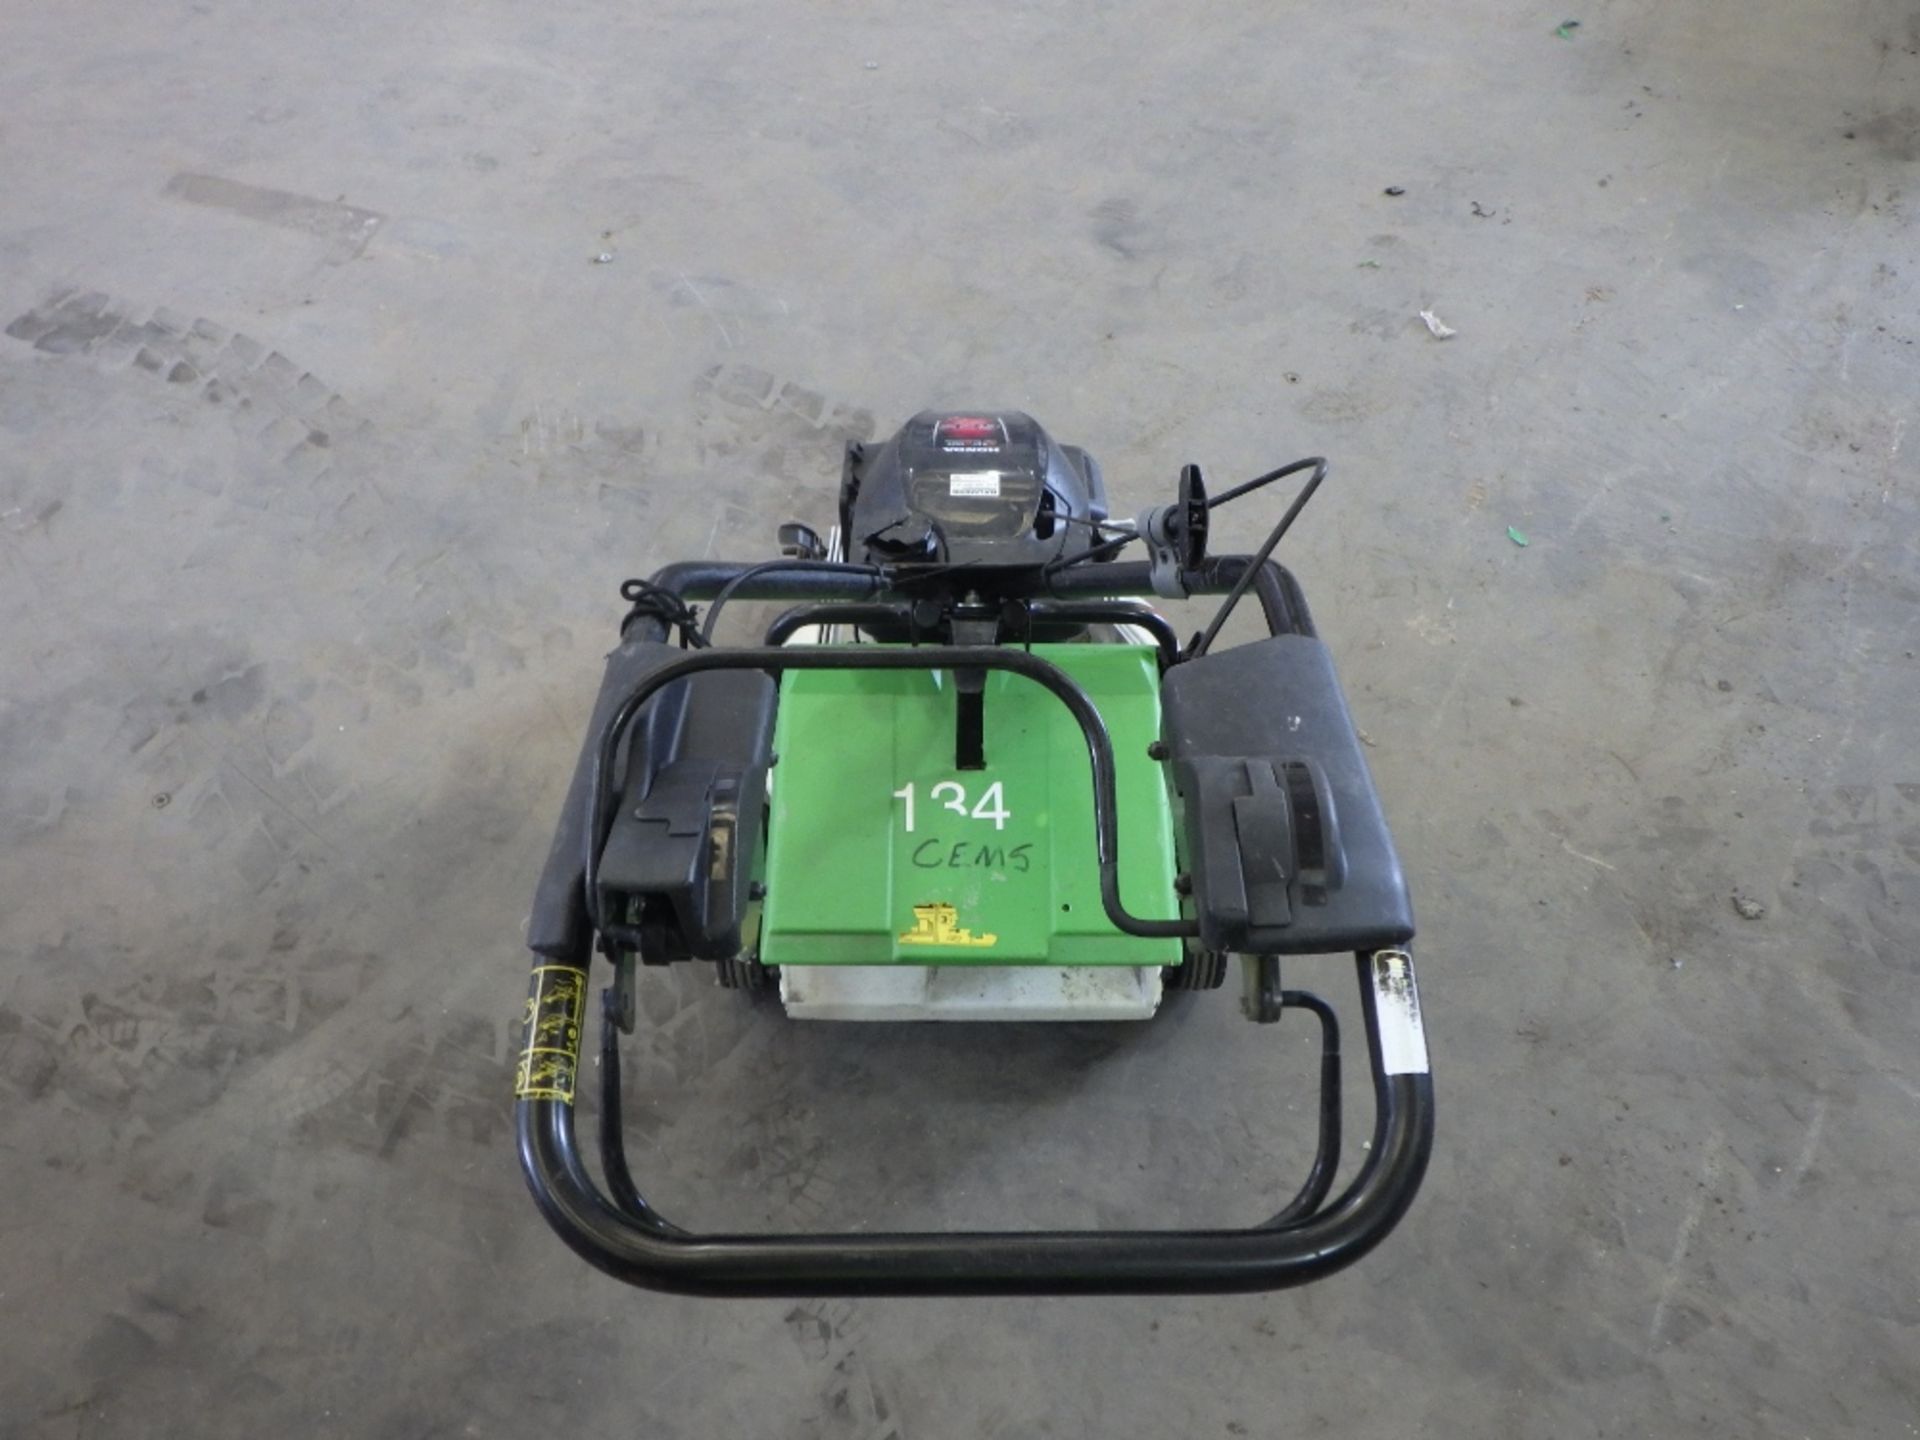 ETESIA PHTS3 LAWN MOWER - Image 4 of 4